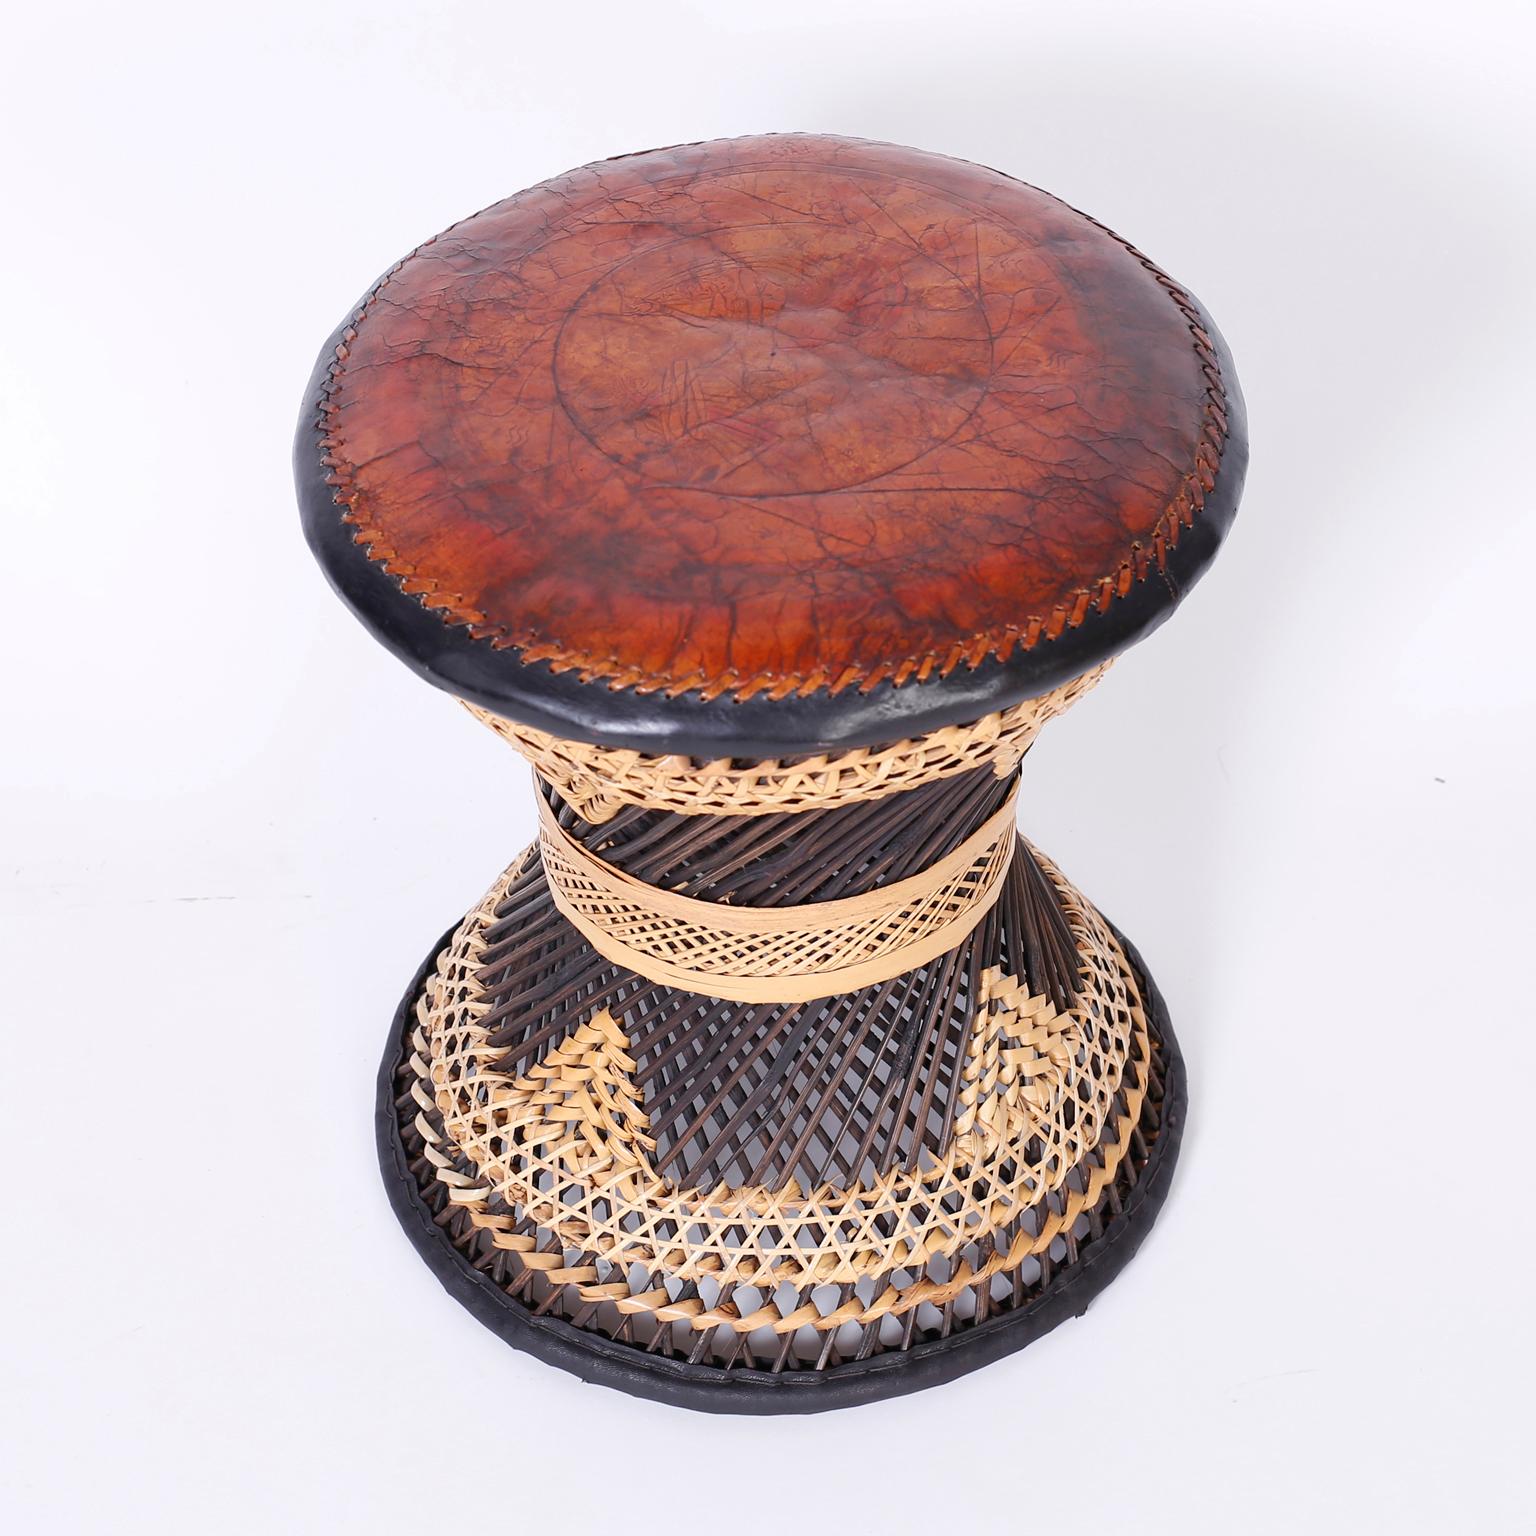 Moorish Three Moroccan Wicker and Leather Stools or Ottomans, Priced Individually